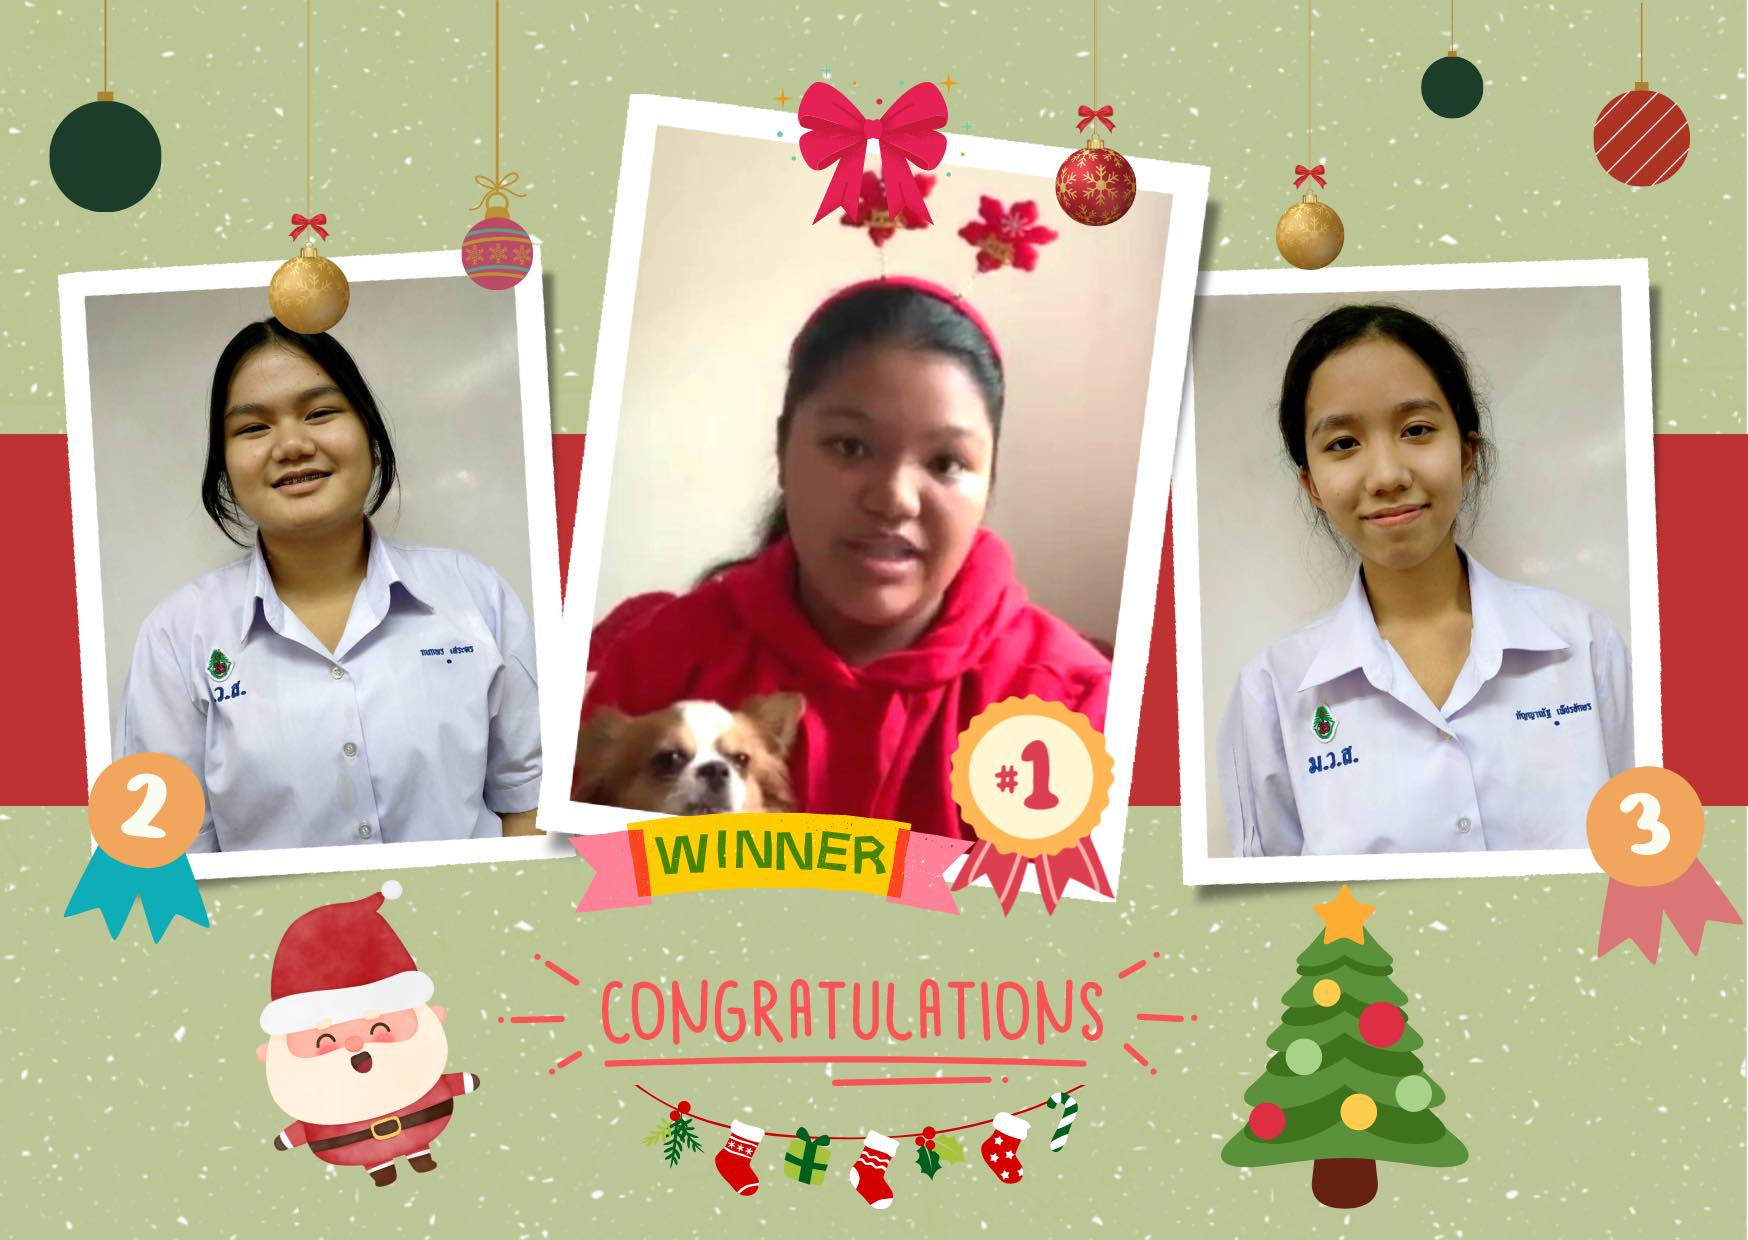 The result of Wish Your Love Merry Christmas Activity!!